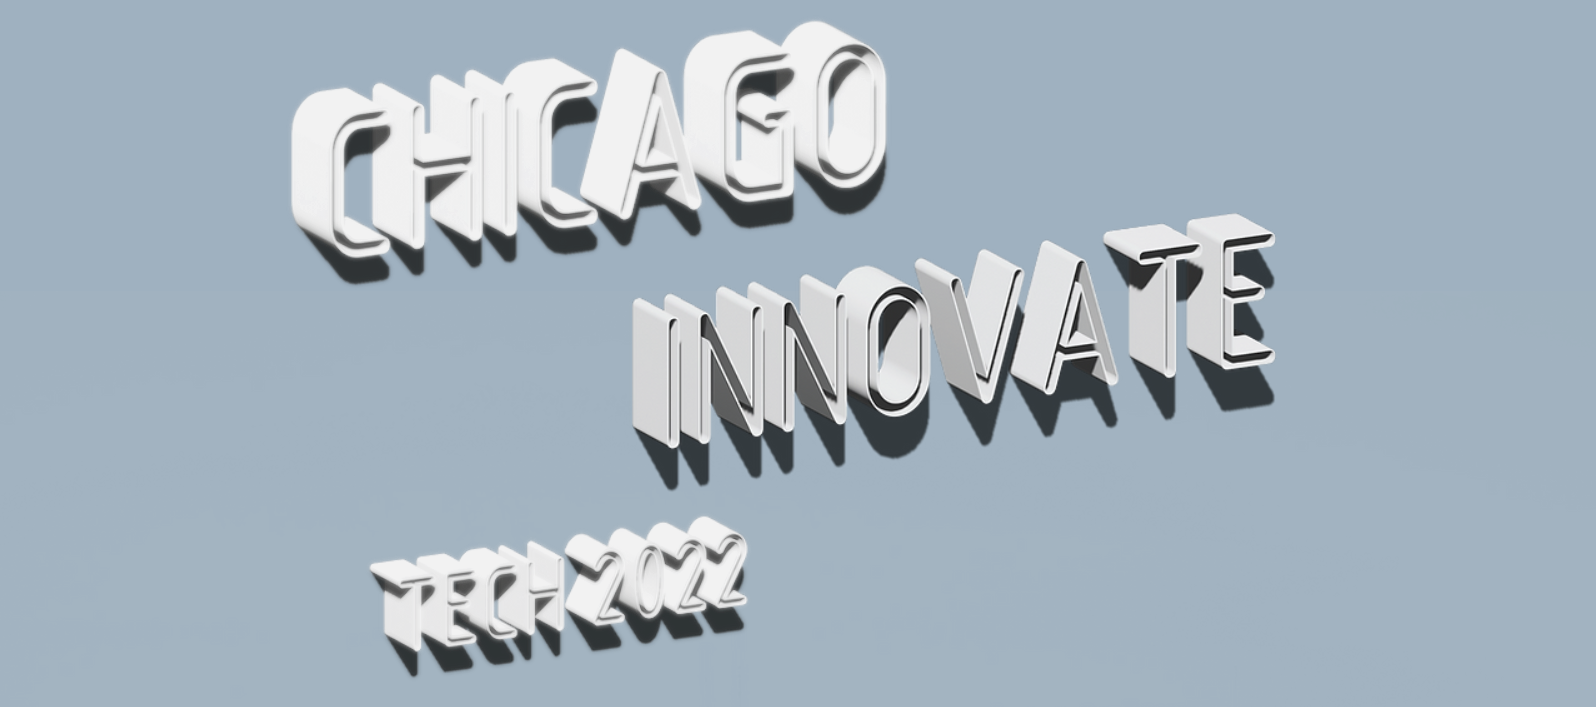 chicago innovate logo.png